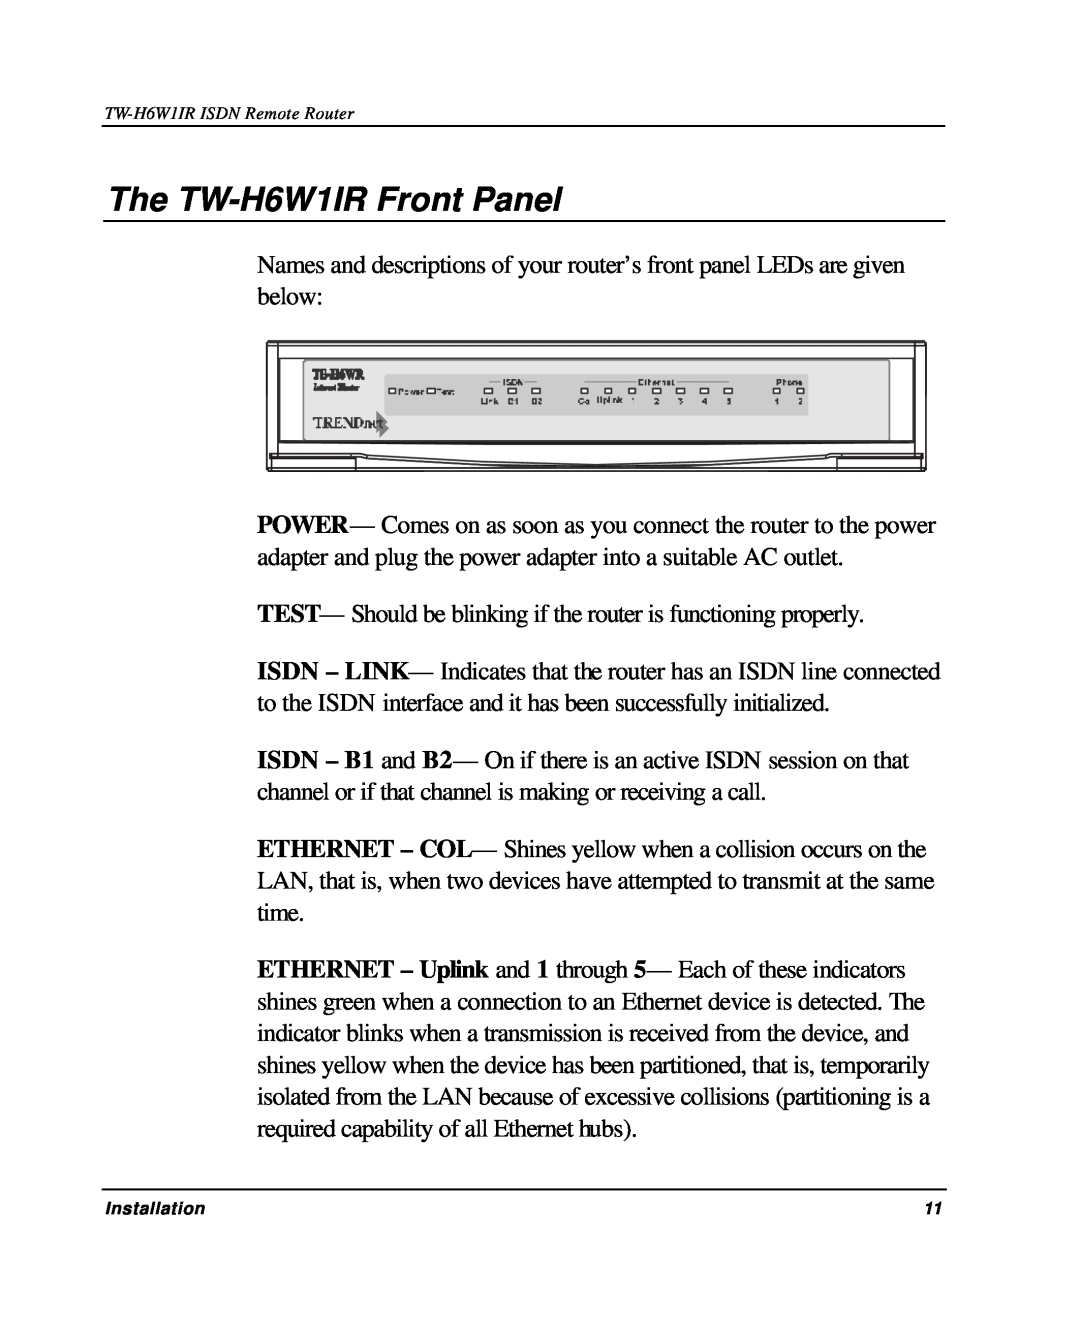 TRENDnet manual The TW-H6W1IR Front Panel 